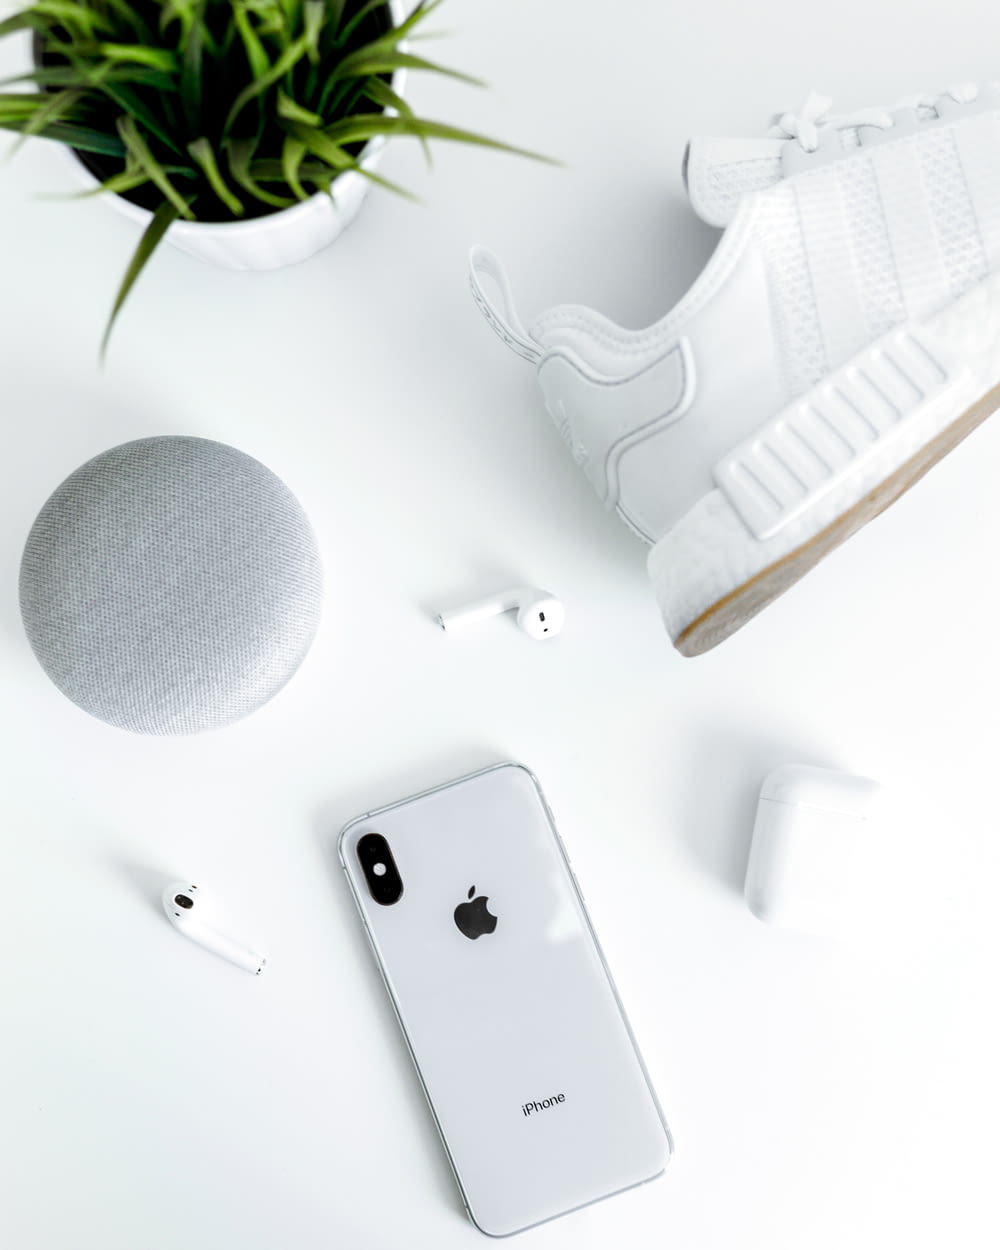 silver iPhone X near white adidas NMD shoe, AirPods with case, and chalk Google Home Mini